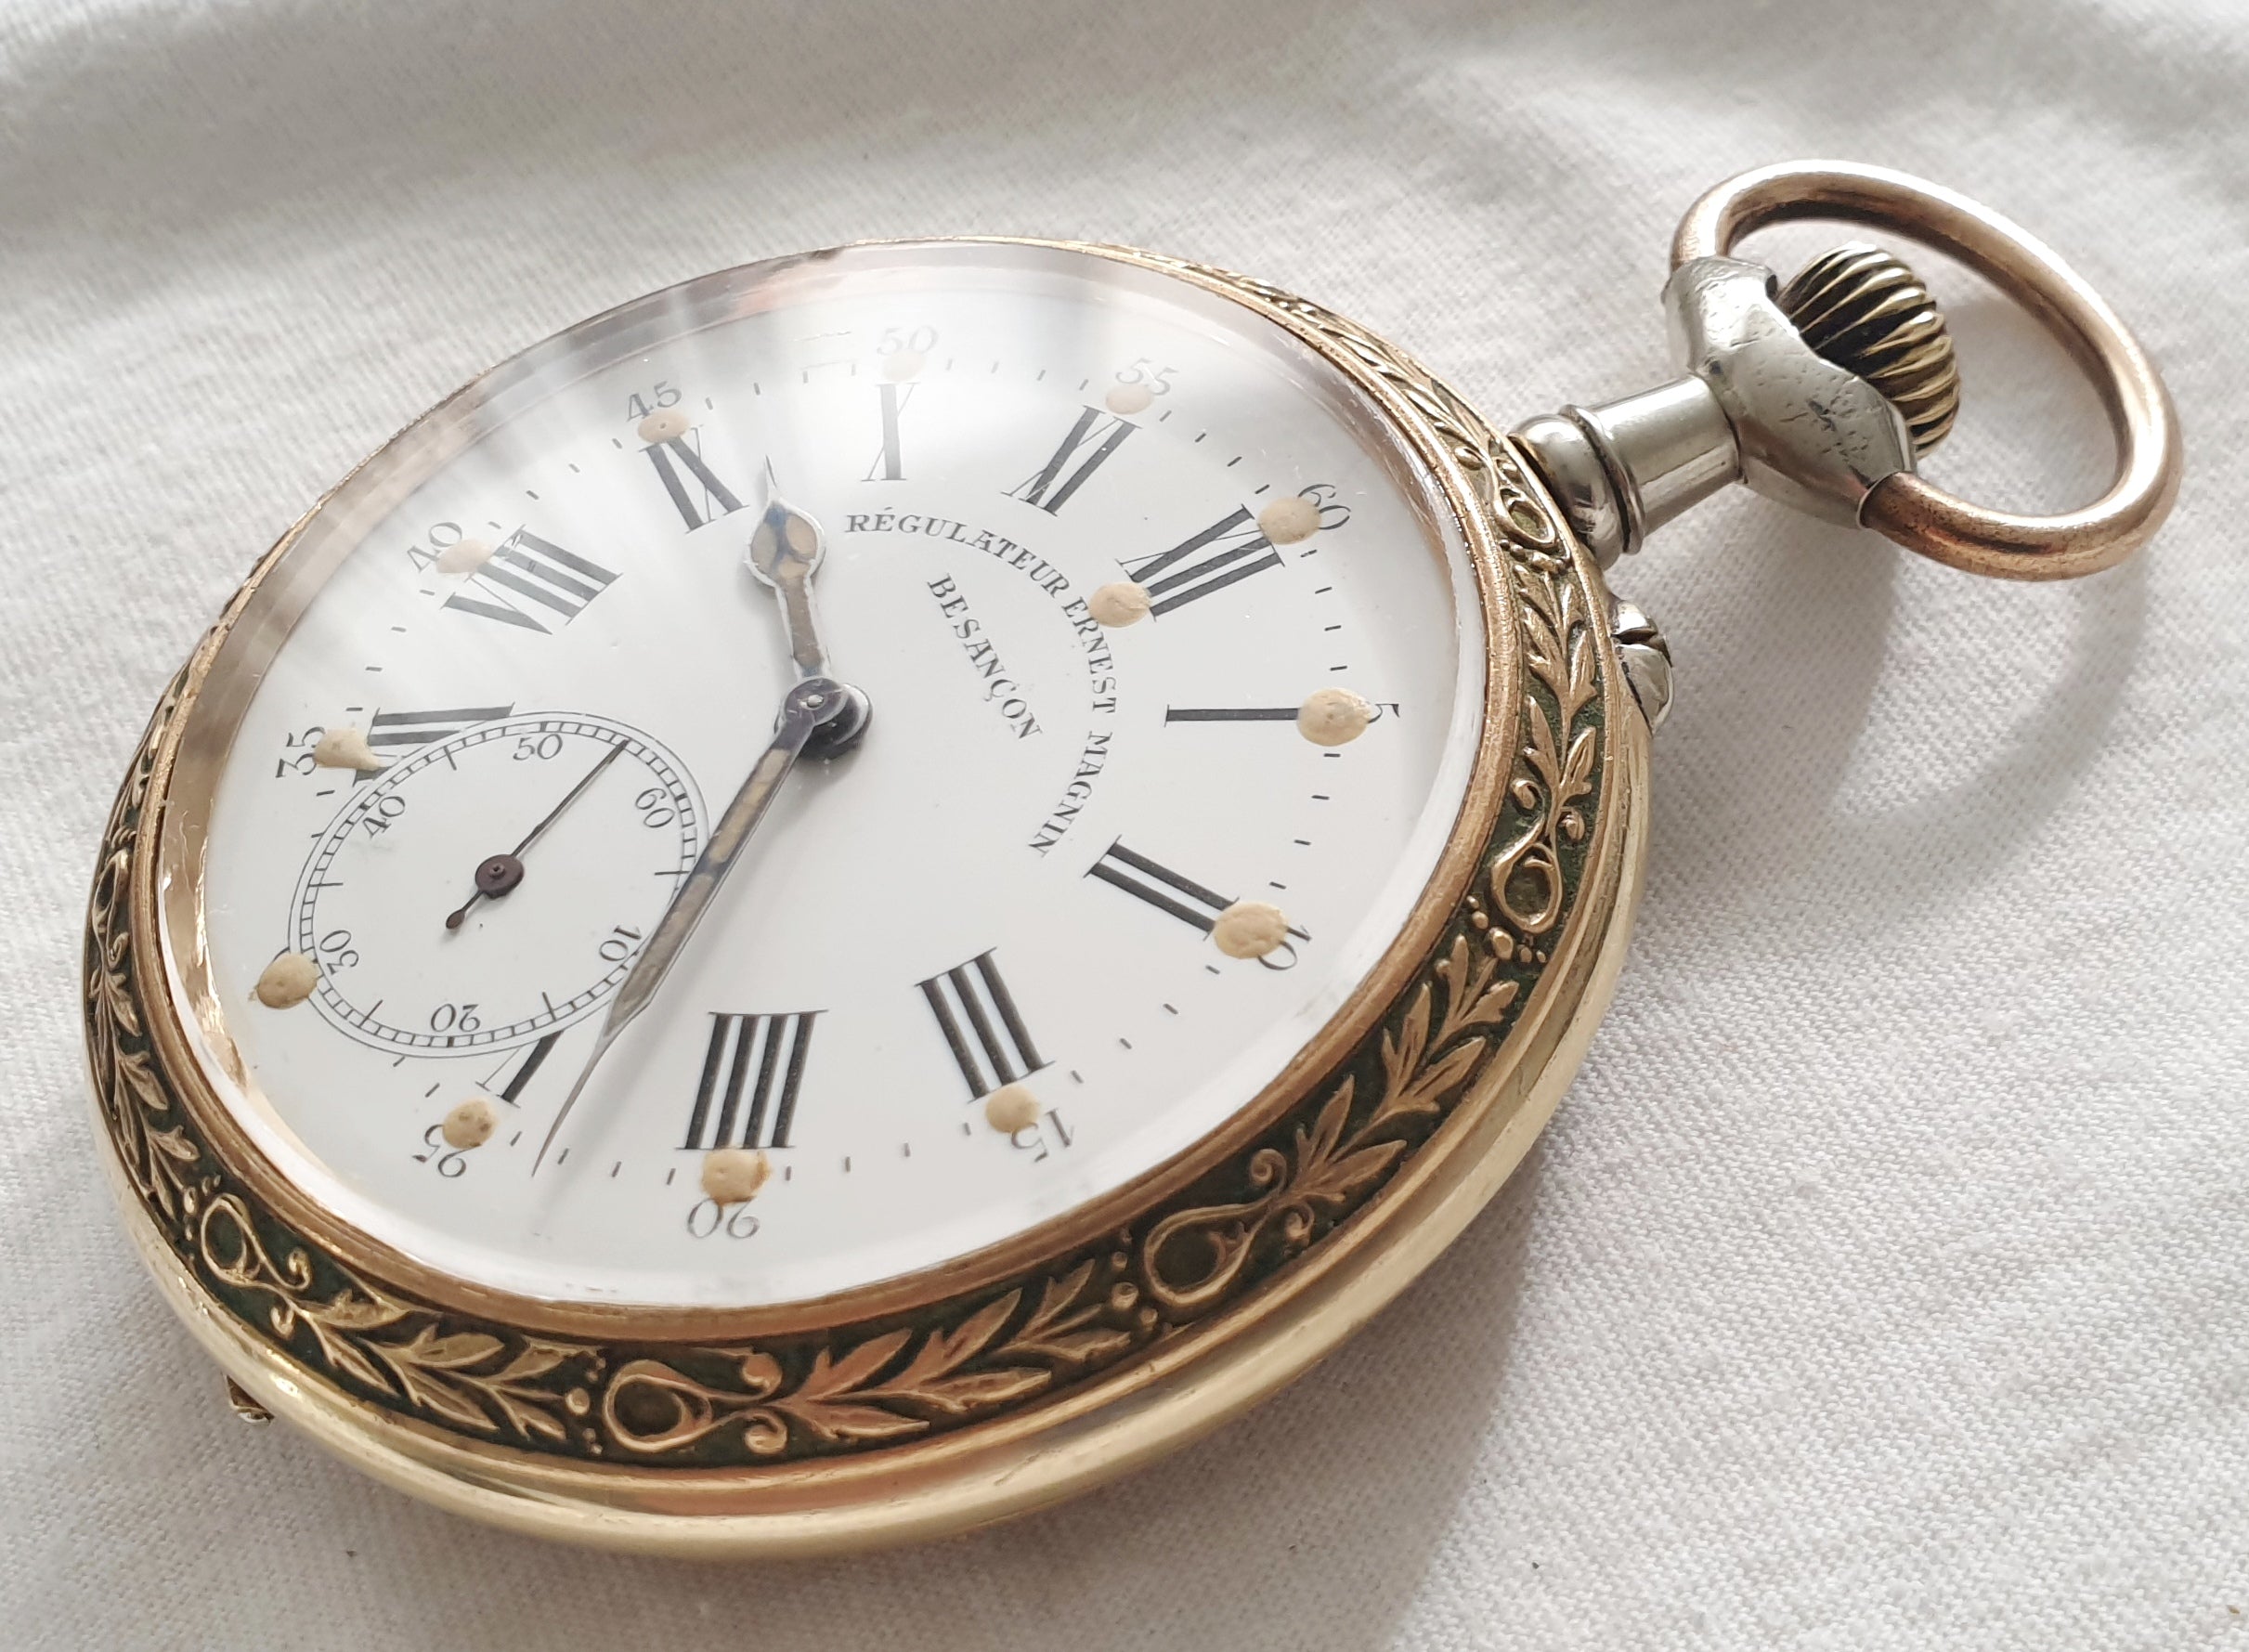 Proantic: Gusset Or Pocket Watch From Paul Jeannot Chronometer In Ster